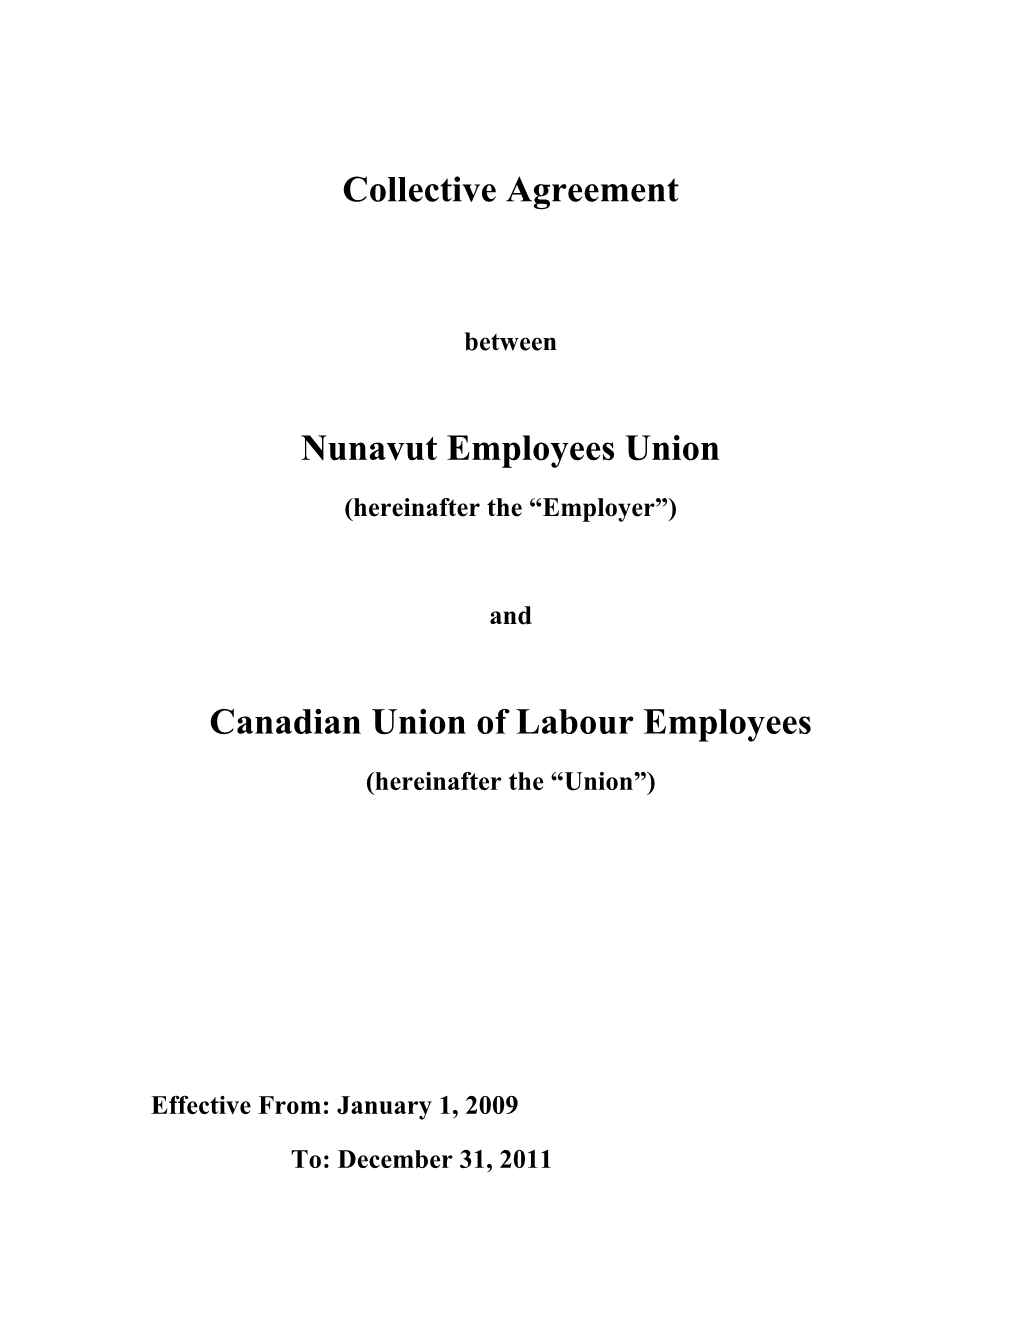 Collective Agreement Between Nunavut Employees Union (Hereinafter the Employer ) and Canadian